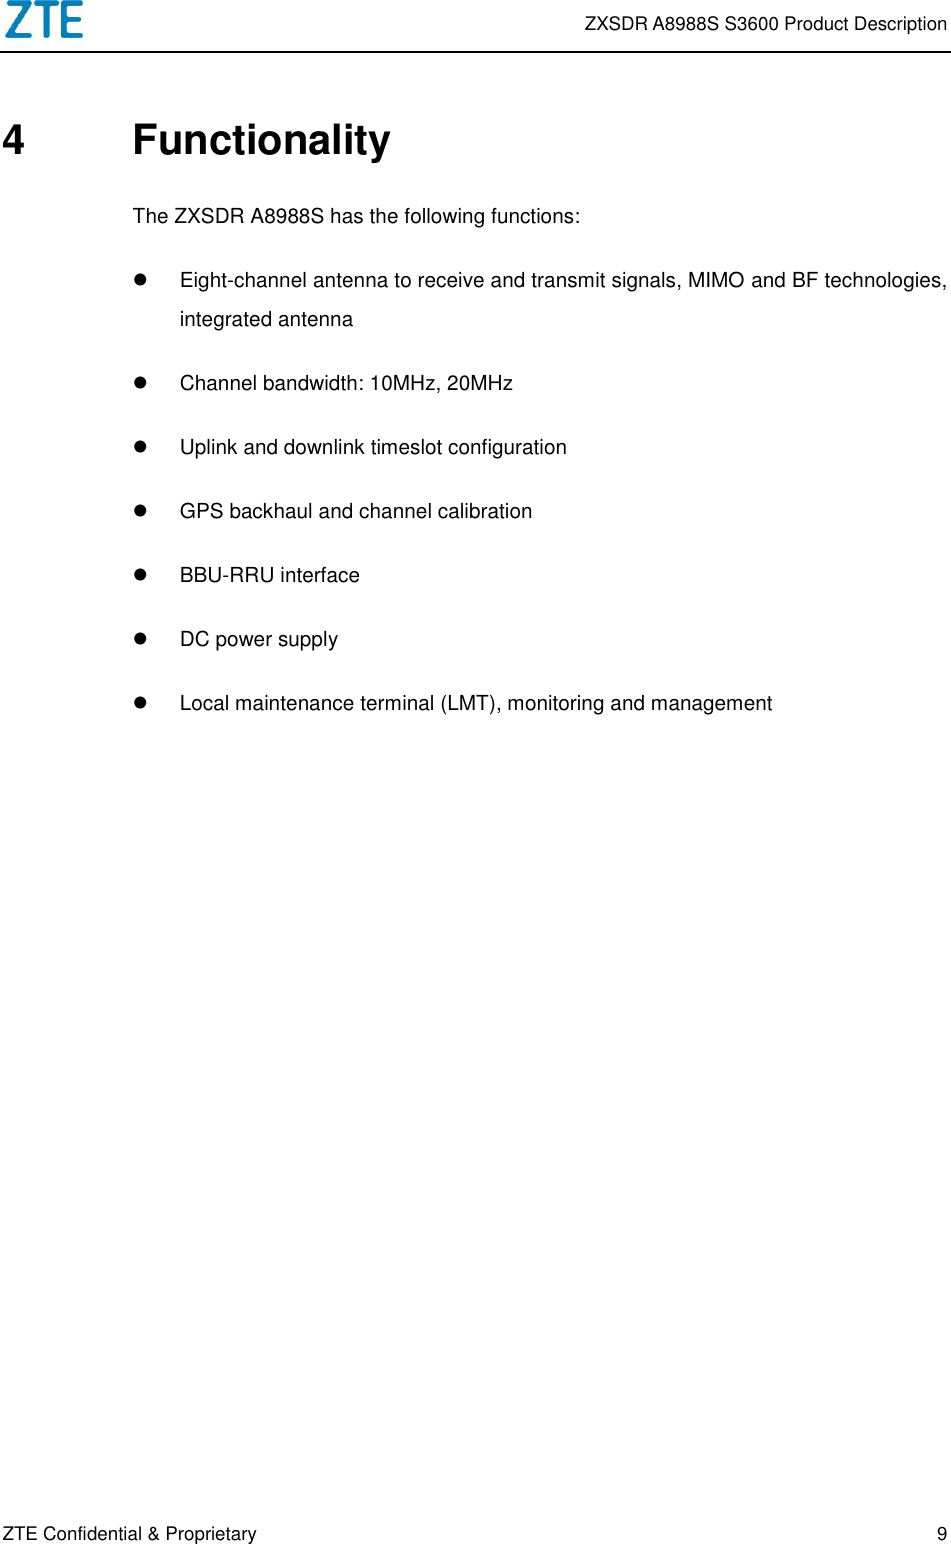 Page 11 of ZTE A8988SS3600 LTE Remote Radio Unit User Manual ZXSDR A8988S S3600 Product Description